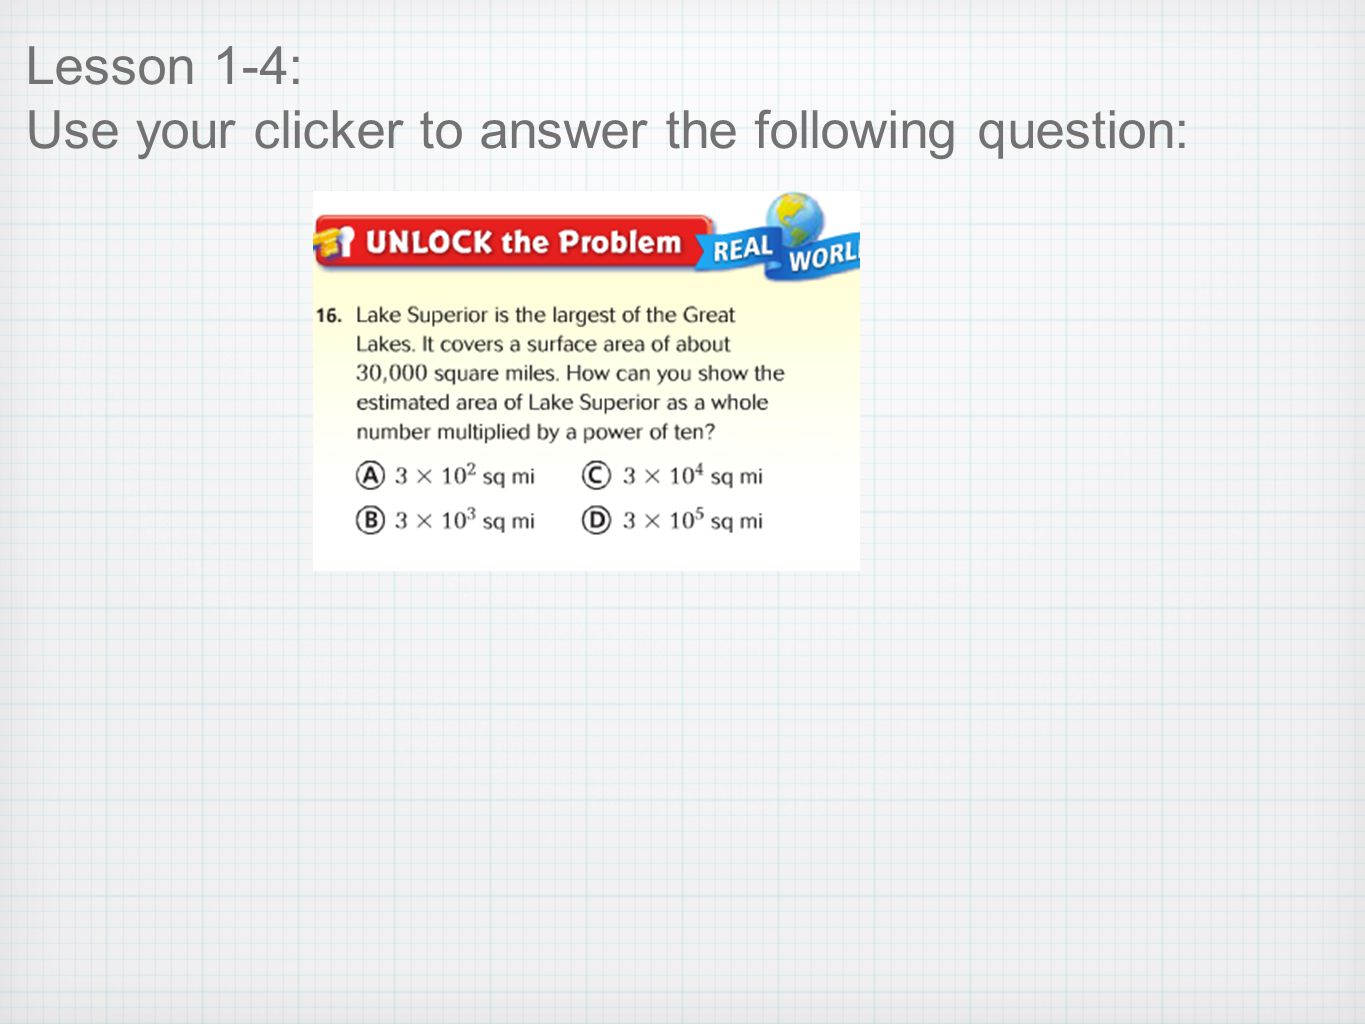 Lesson 1-4: Use your clicker to answer the following question: